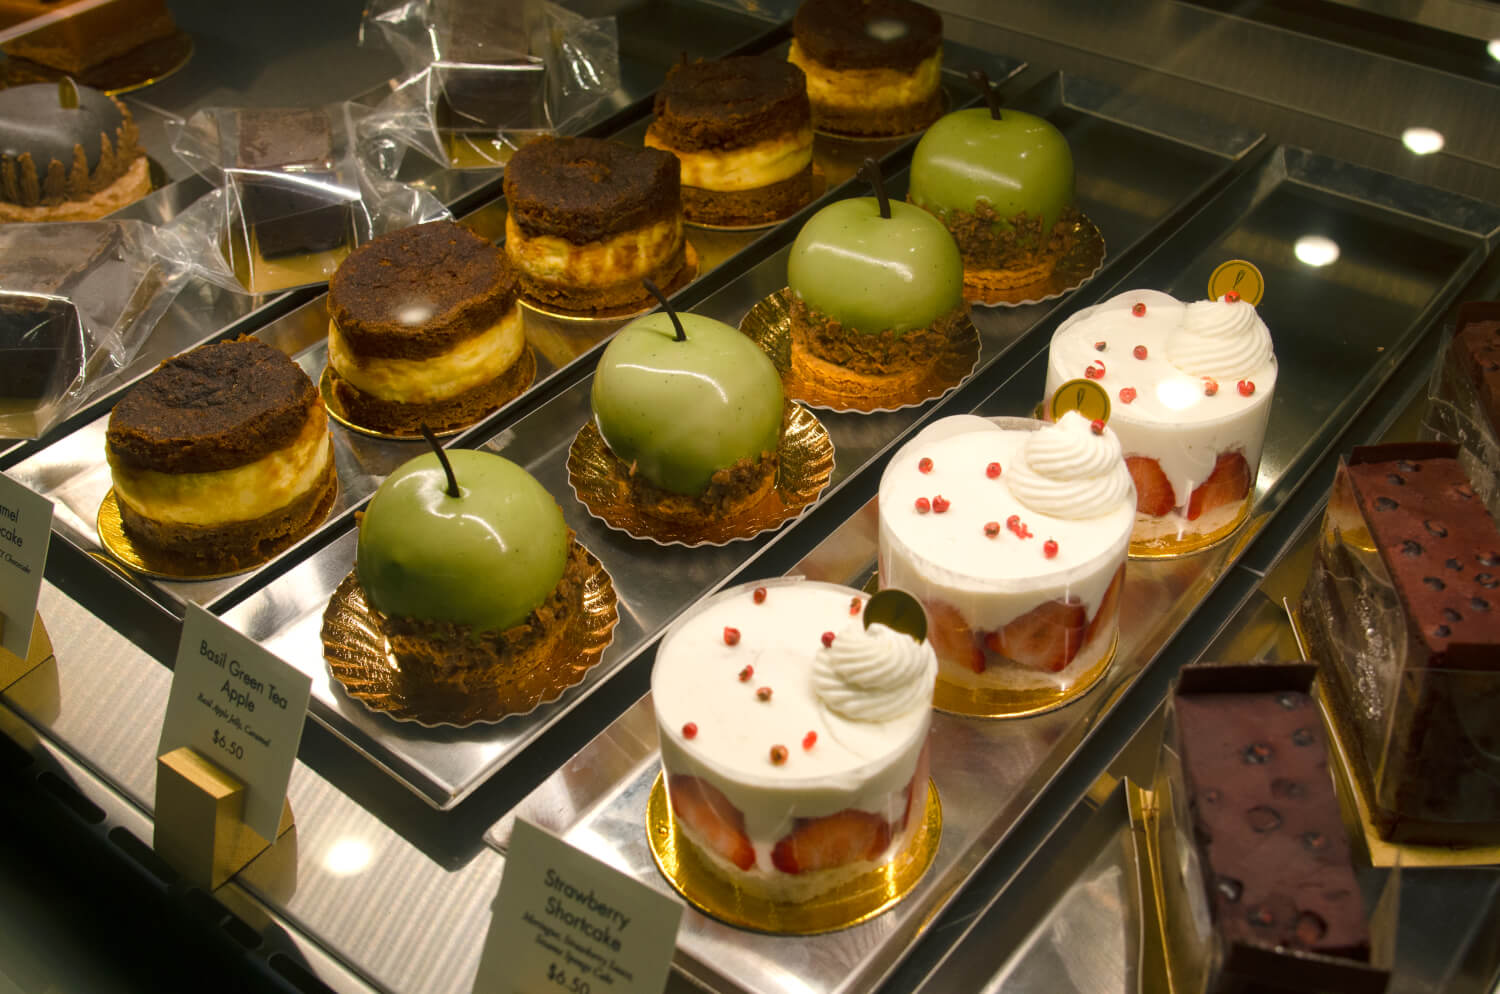 Japanese Strawberry, Apple, and Chocolate desserts in Patisserie Fouet